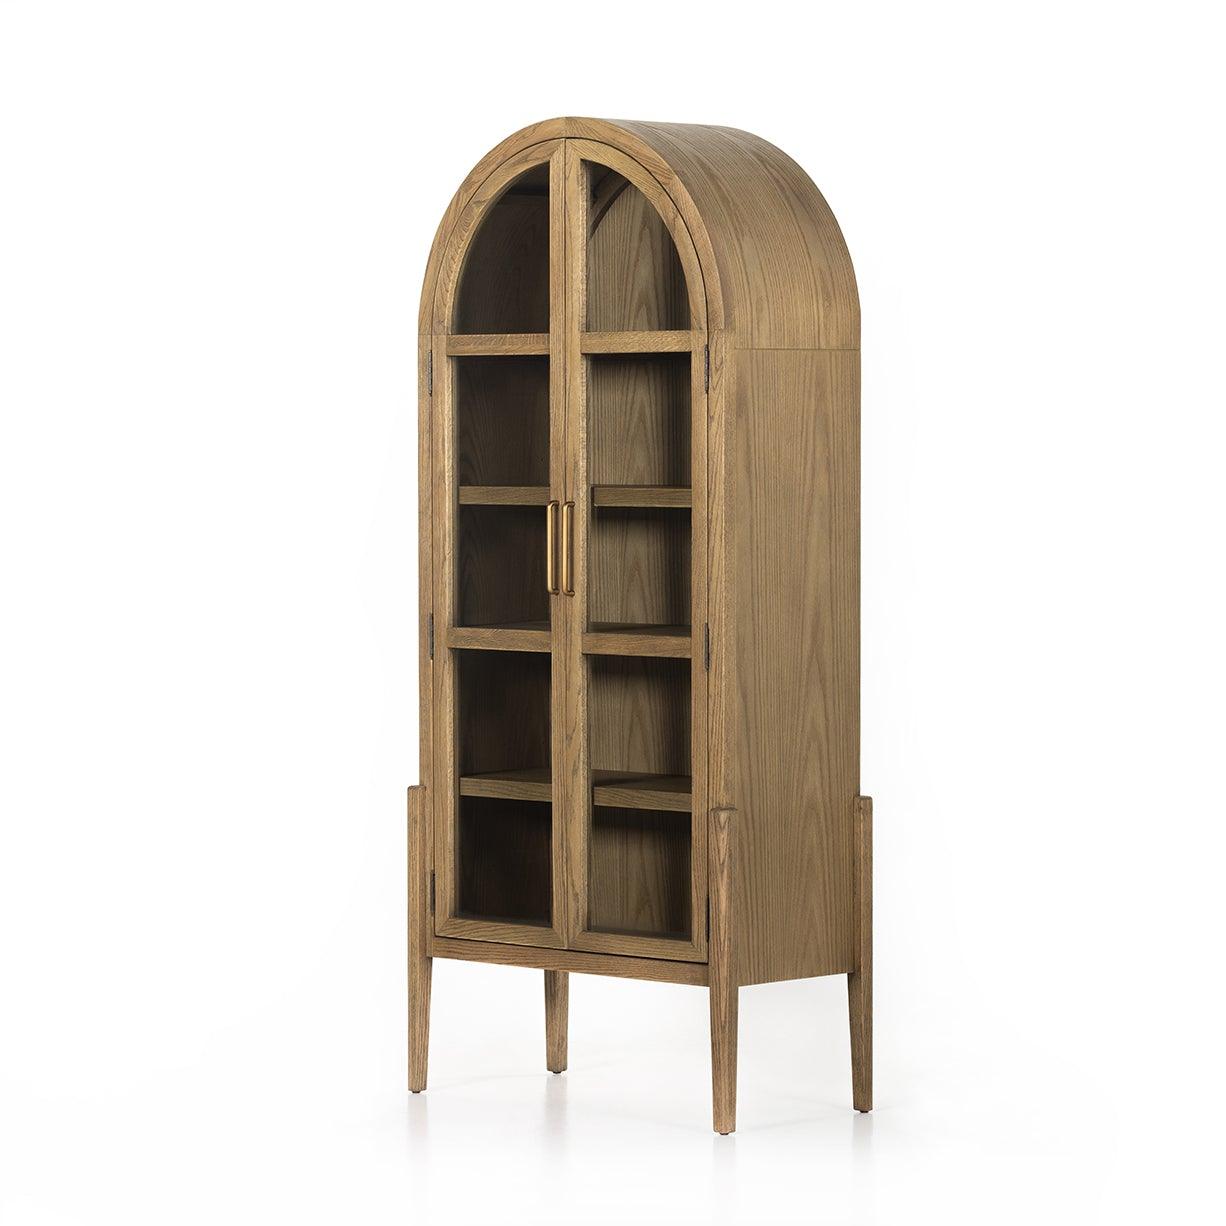 Tolle Drifted Oak Cabinet - Reimagine Designs - Bookcases, cabinet, new